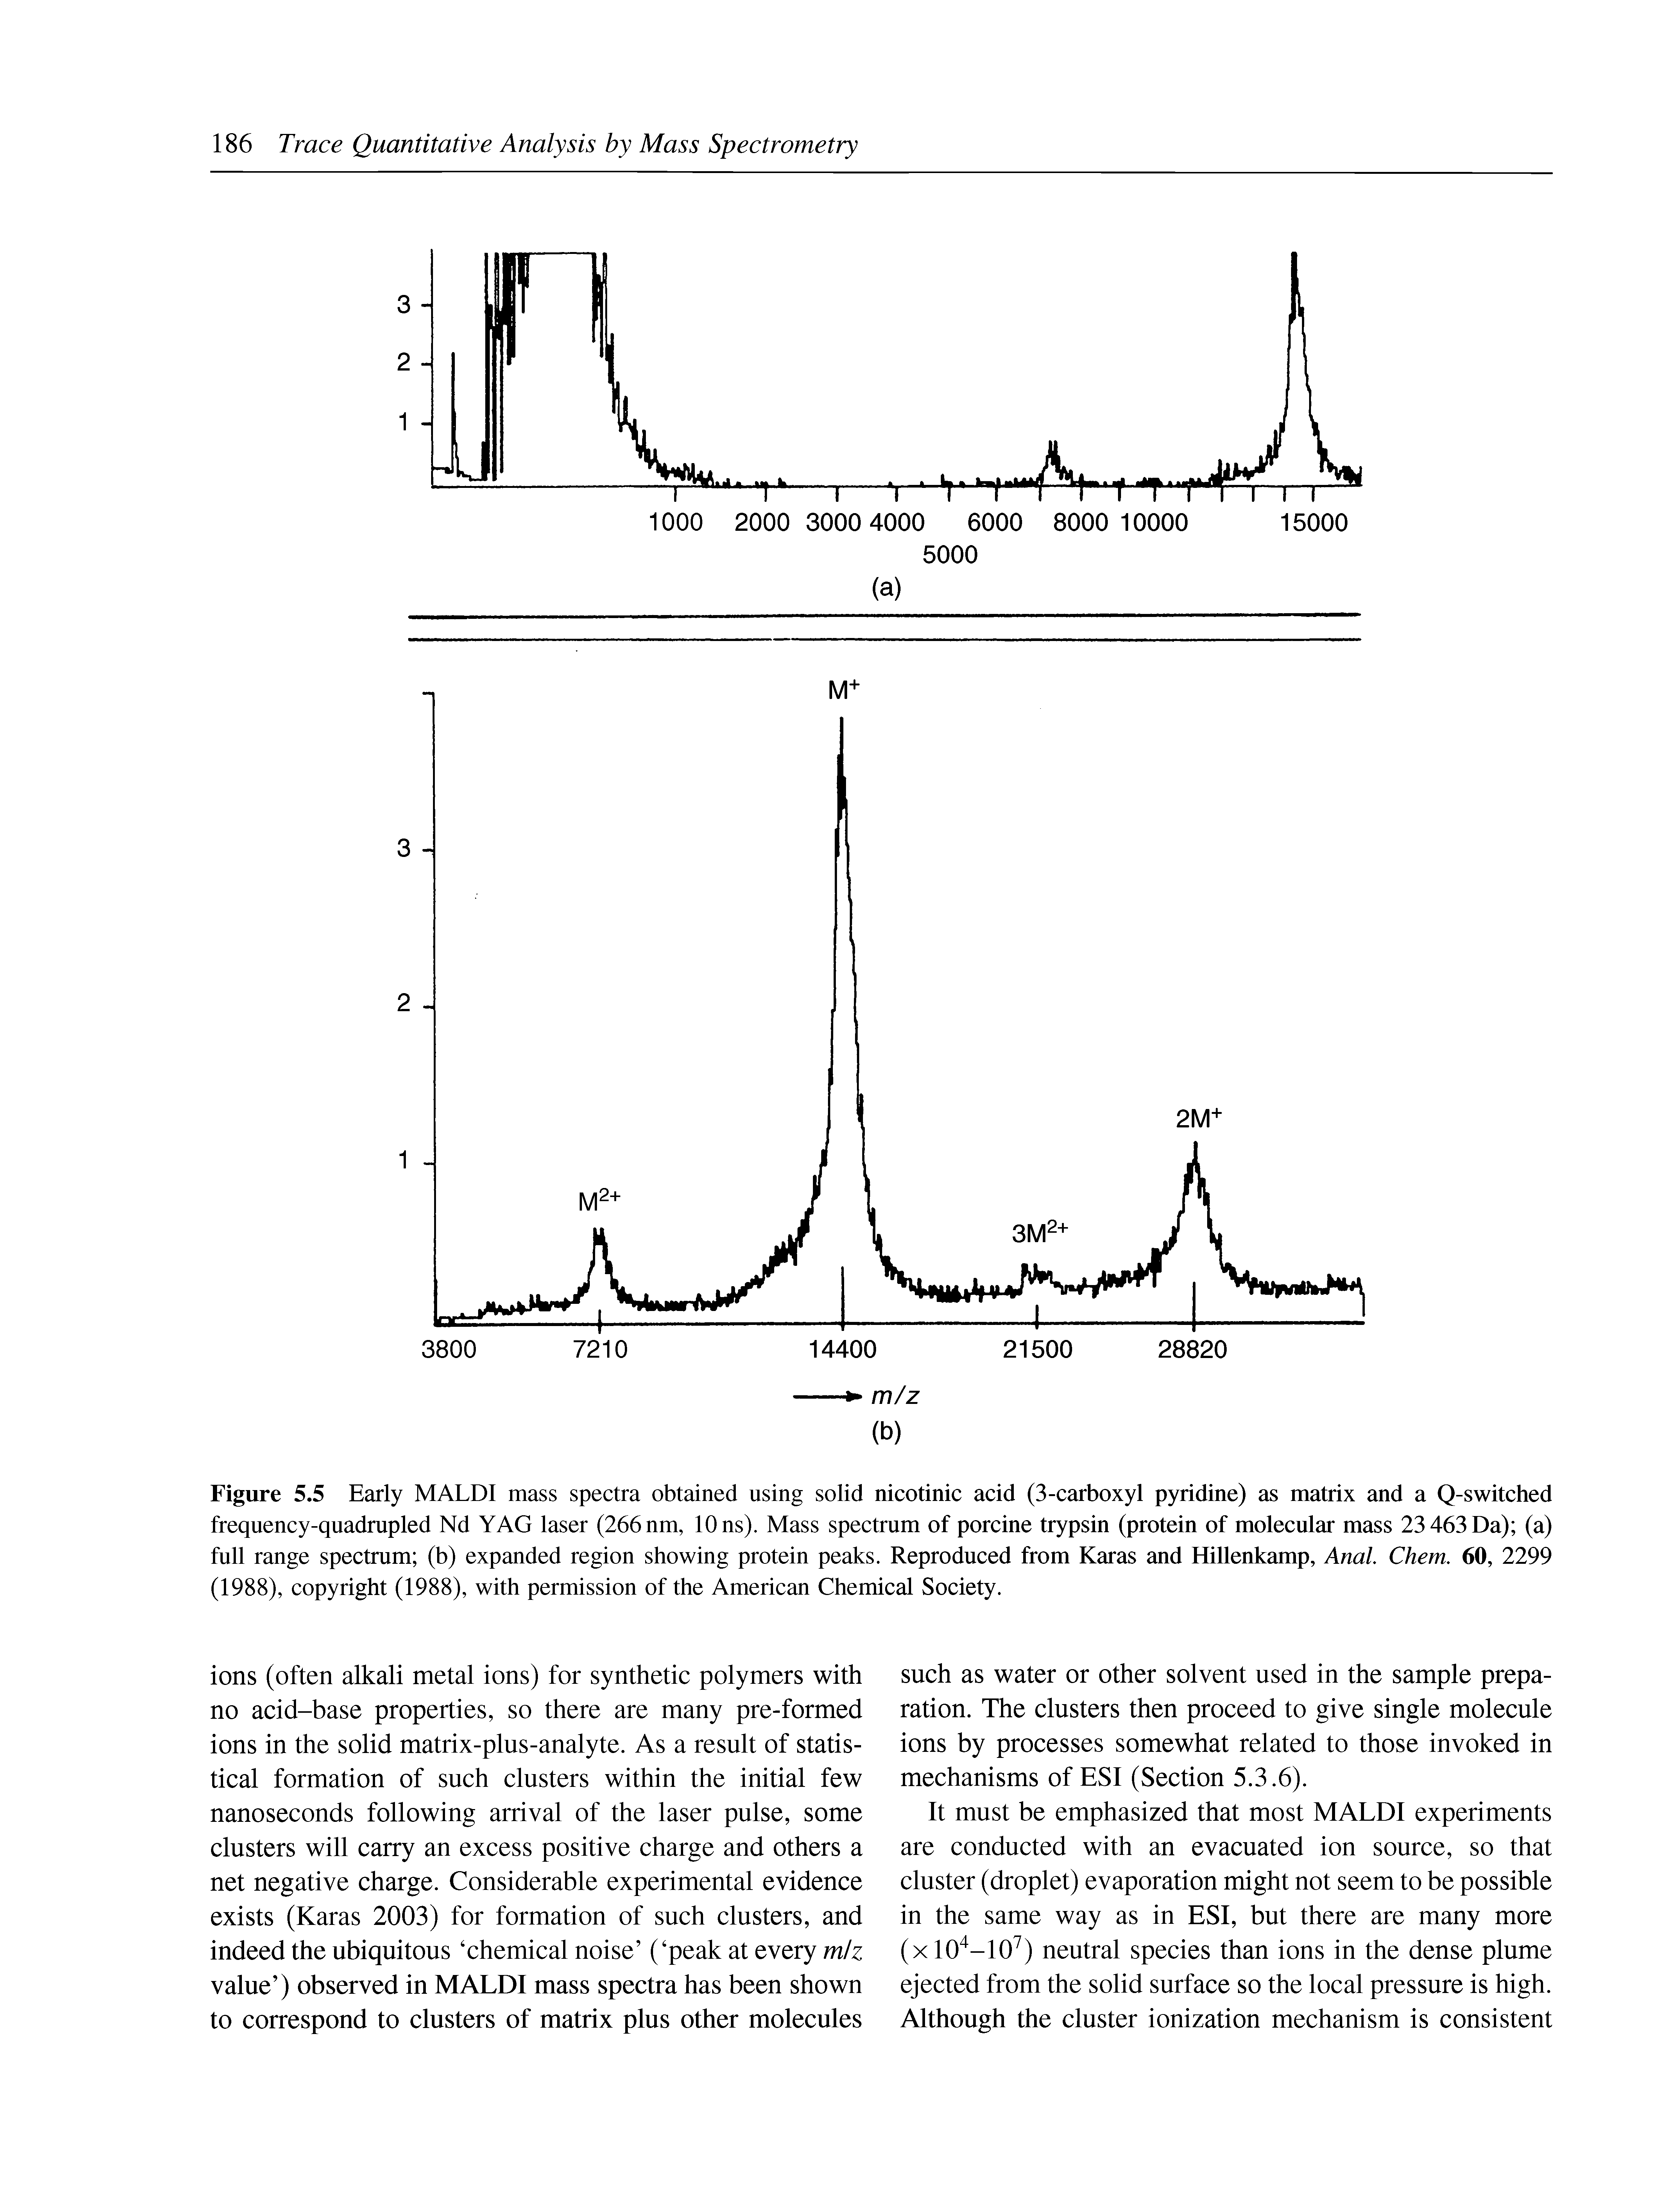 Figure 5.5 Early MALDI mass spectra obtained using solid nicotinic acid (3-carboxyl pyridine) as matrix and a Q-switched frequency-quadrupled Nd YAG laser (266 nm, 10 ns). Mass spectrum of porcine trypsin (protein of molecular mass 23 463 Da) (a) full range spectrum (b) expanded region showing protein peaks. Reproduced from Karas and Hillenkamp, Anal Chem. 60, 2299 (1988), copyright (1988), with permission of the American Chemical Society.